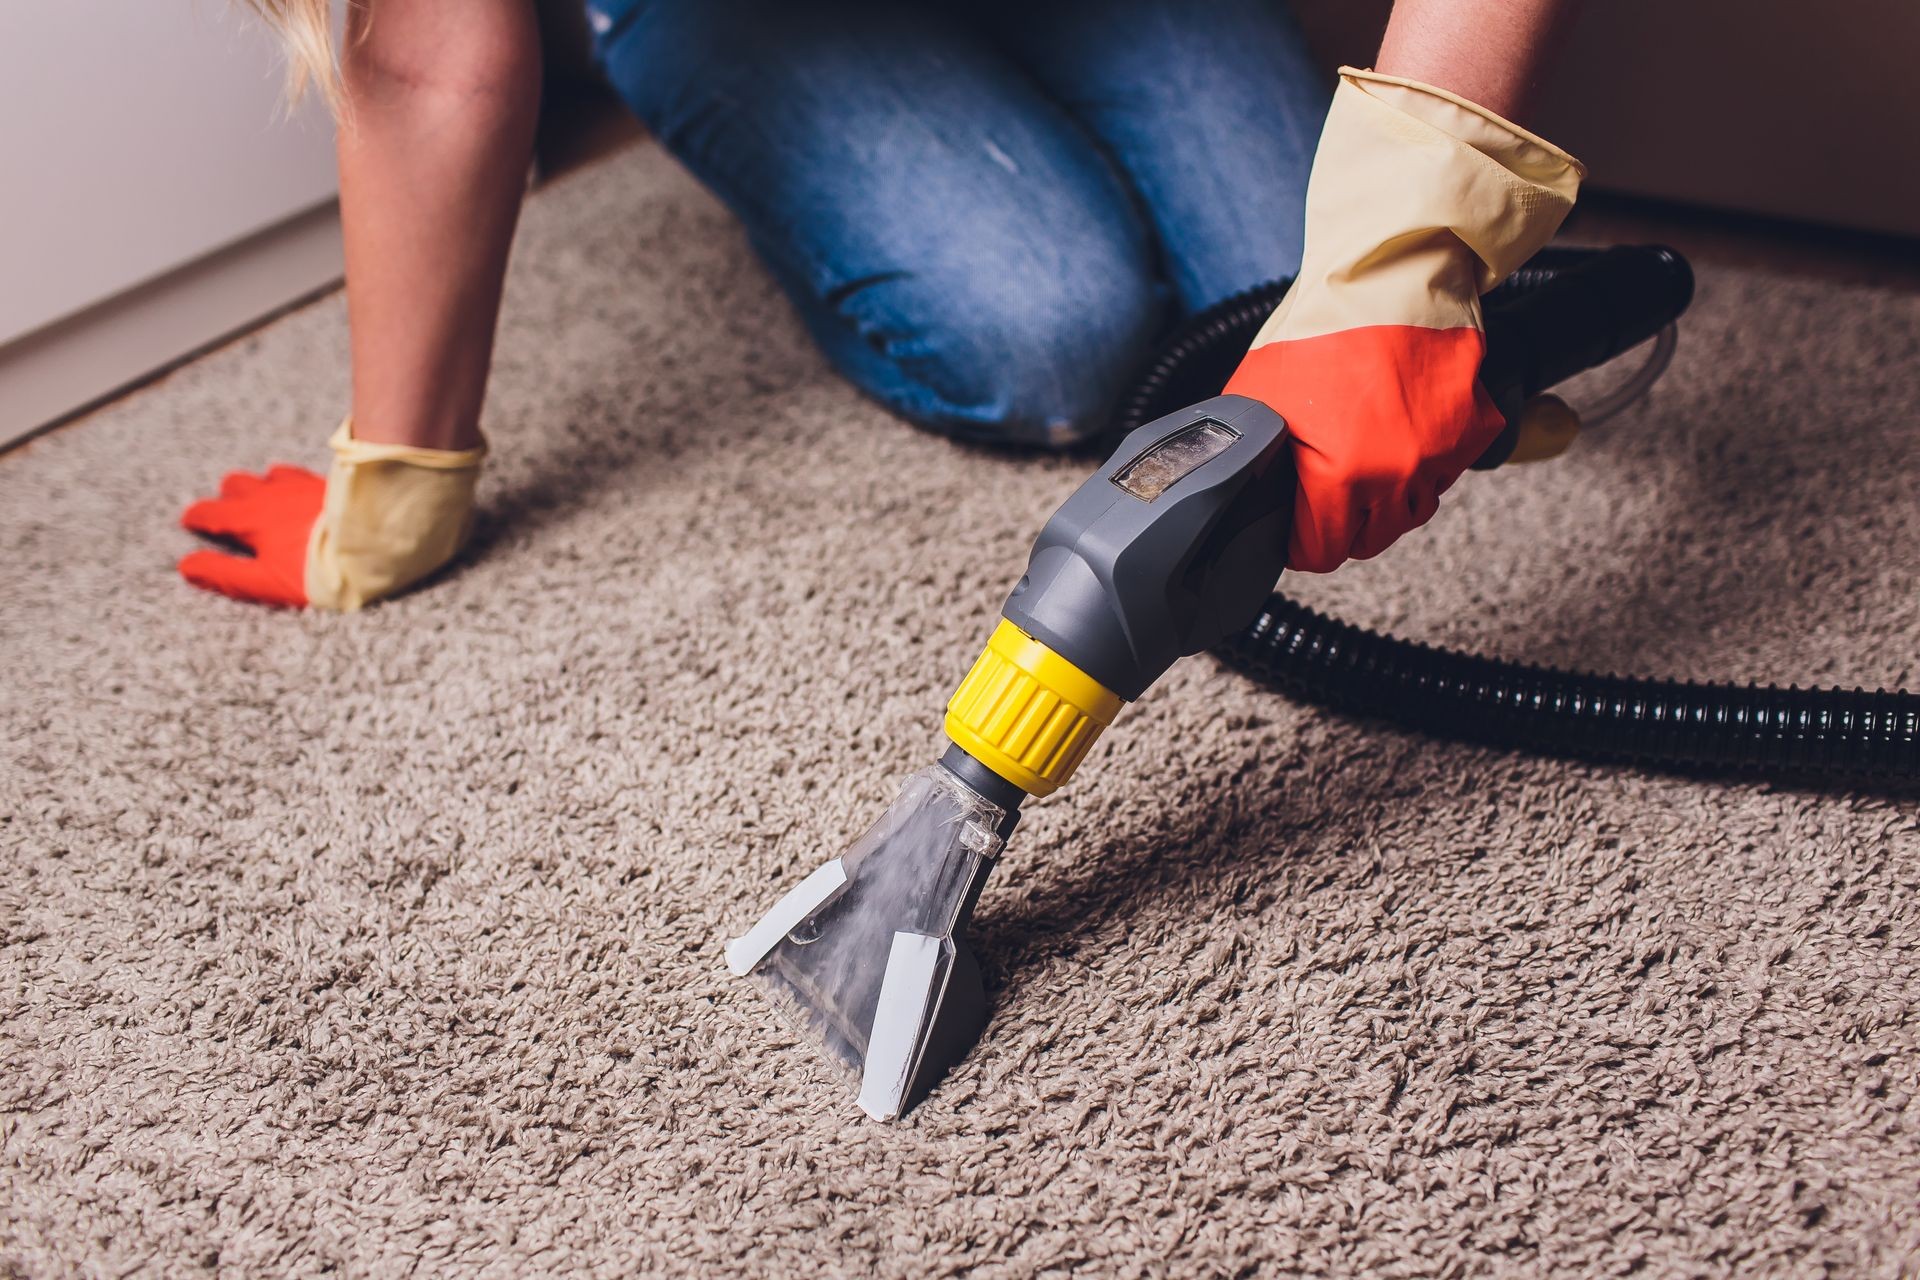 Woman removing dirt from carpet with vacuum cleaner in room.